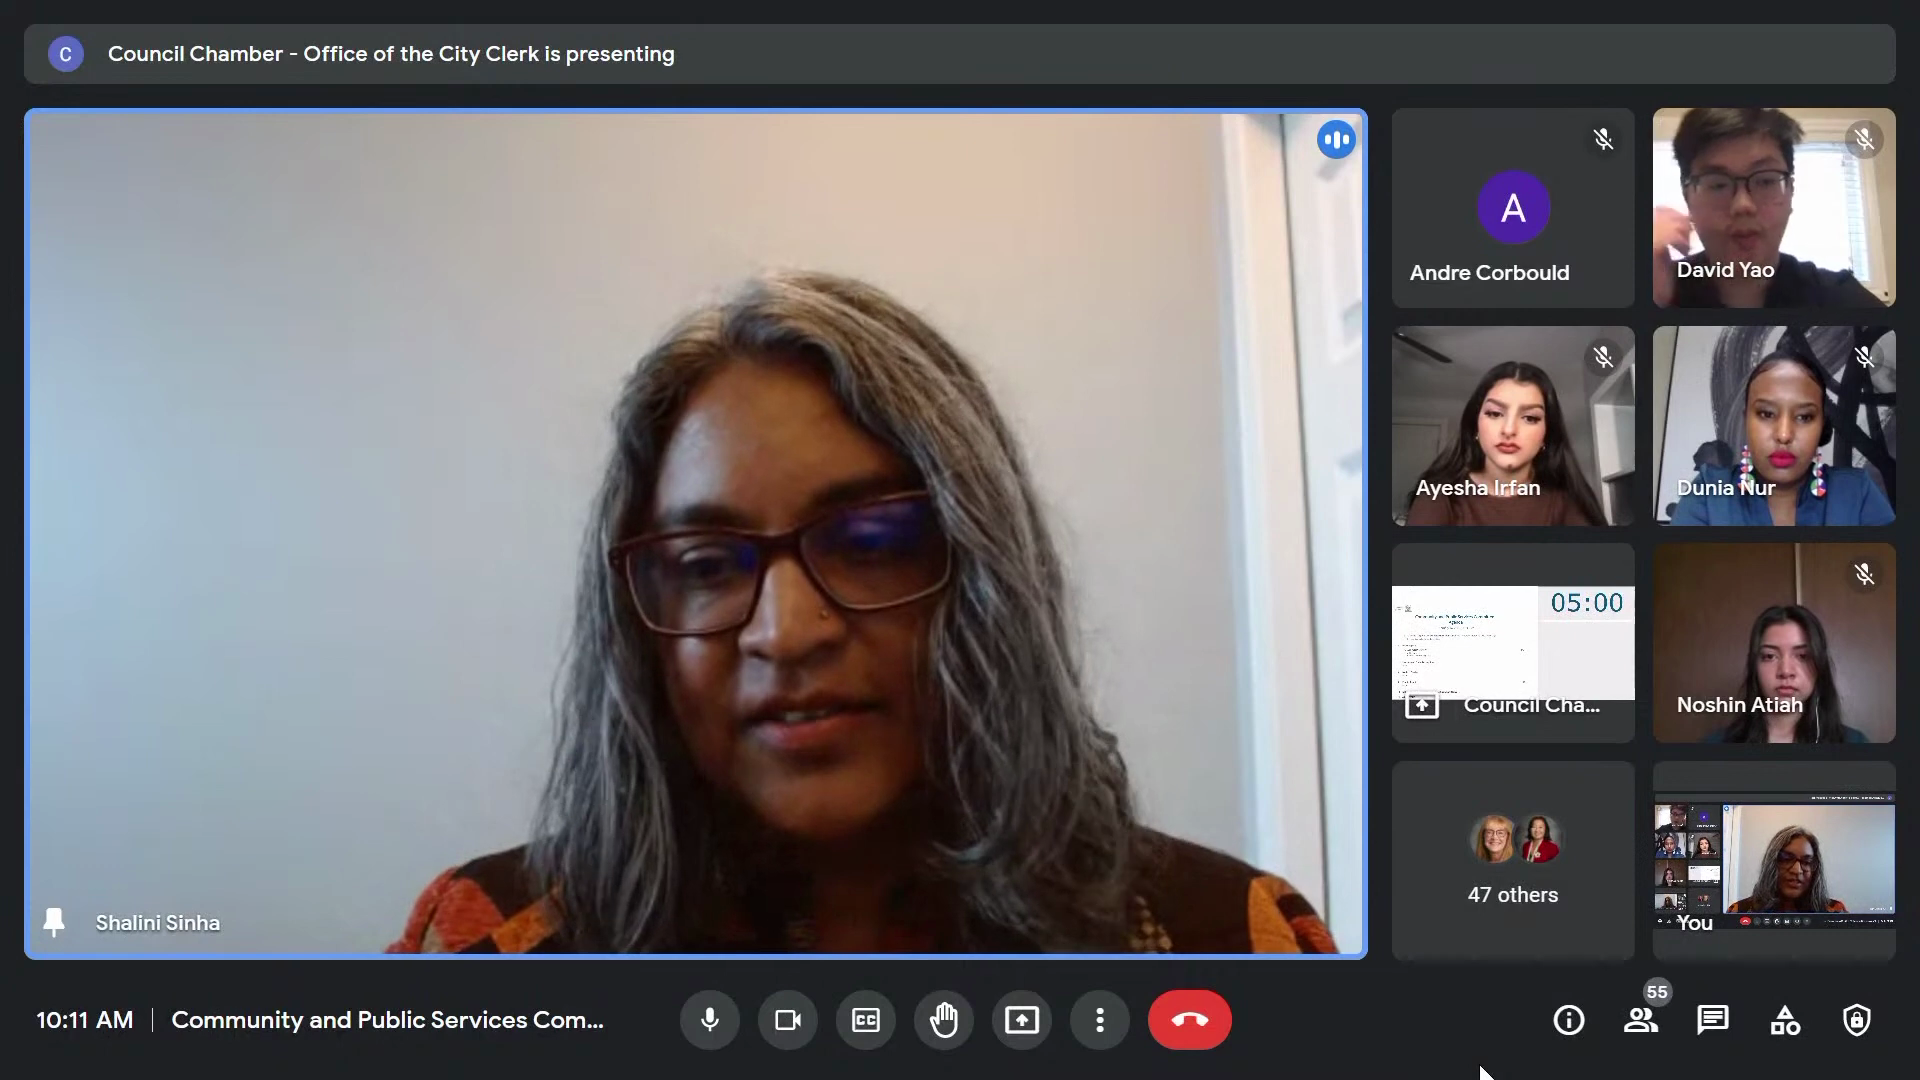 A screenshot of an online meeting of city council's community and public services committee, with Shalini Sinha in the main window and an array of other attendees on the side